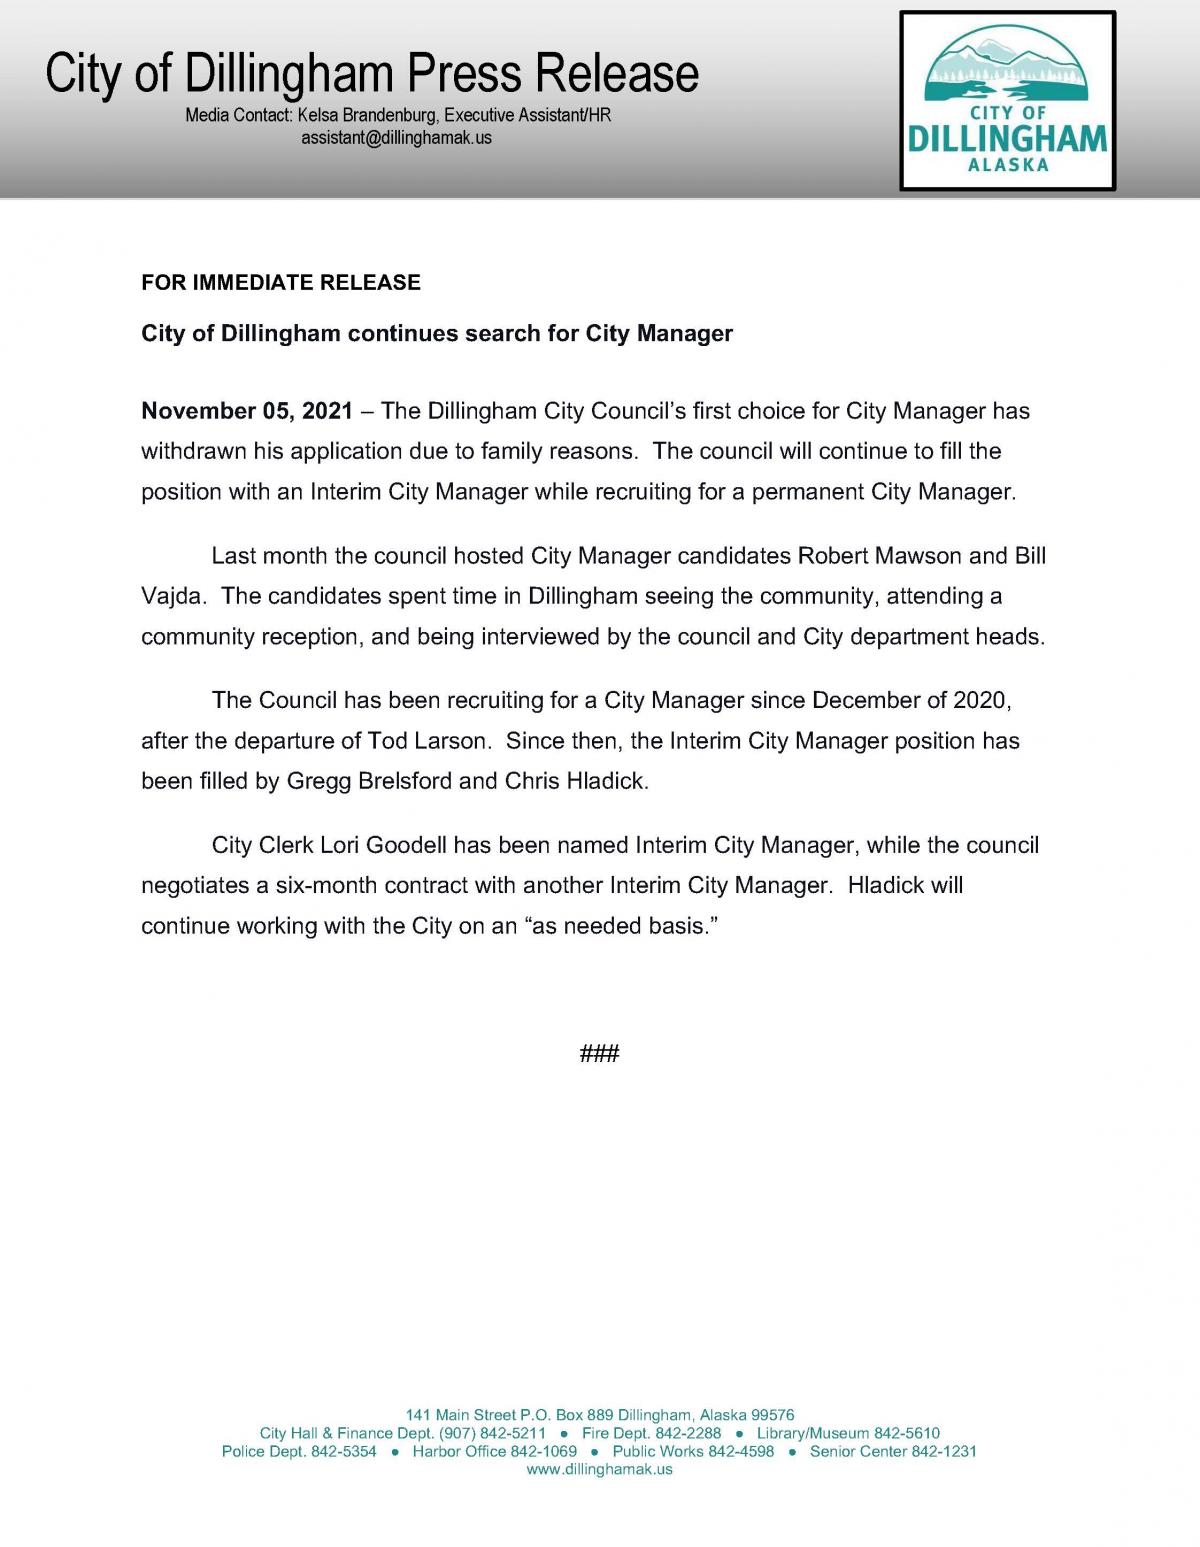 November 05, 2021 City of Dillingham Press Release - City of Dillingham continues search for City Manager